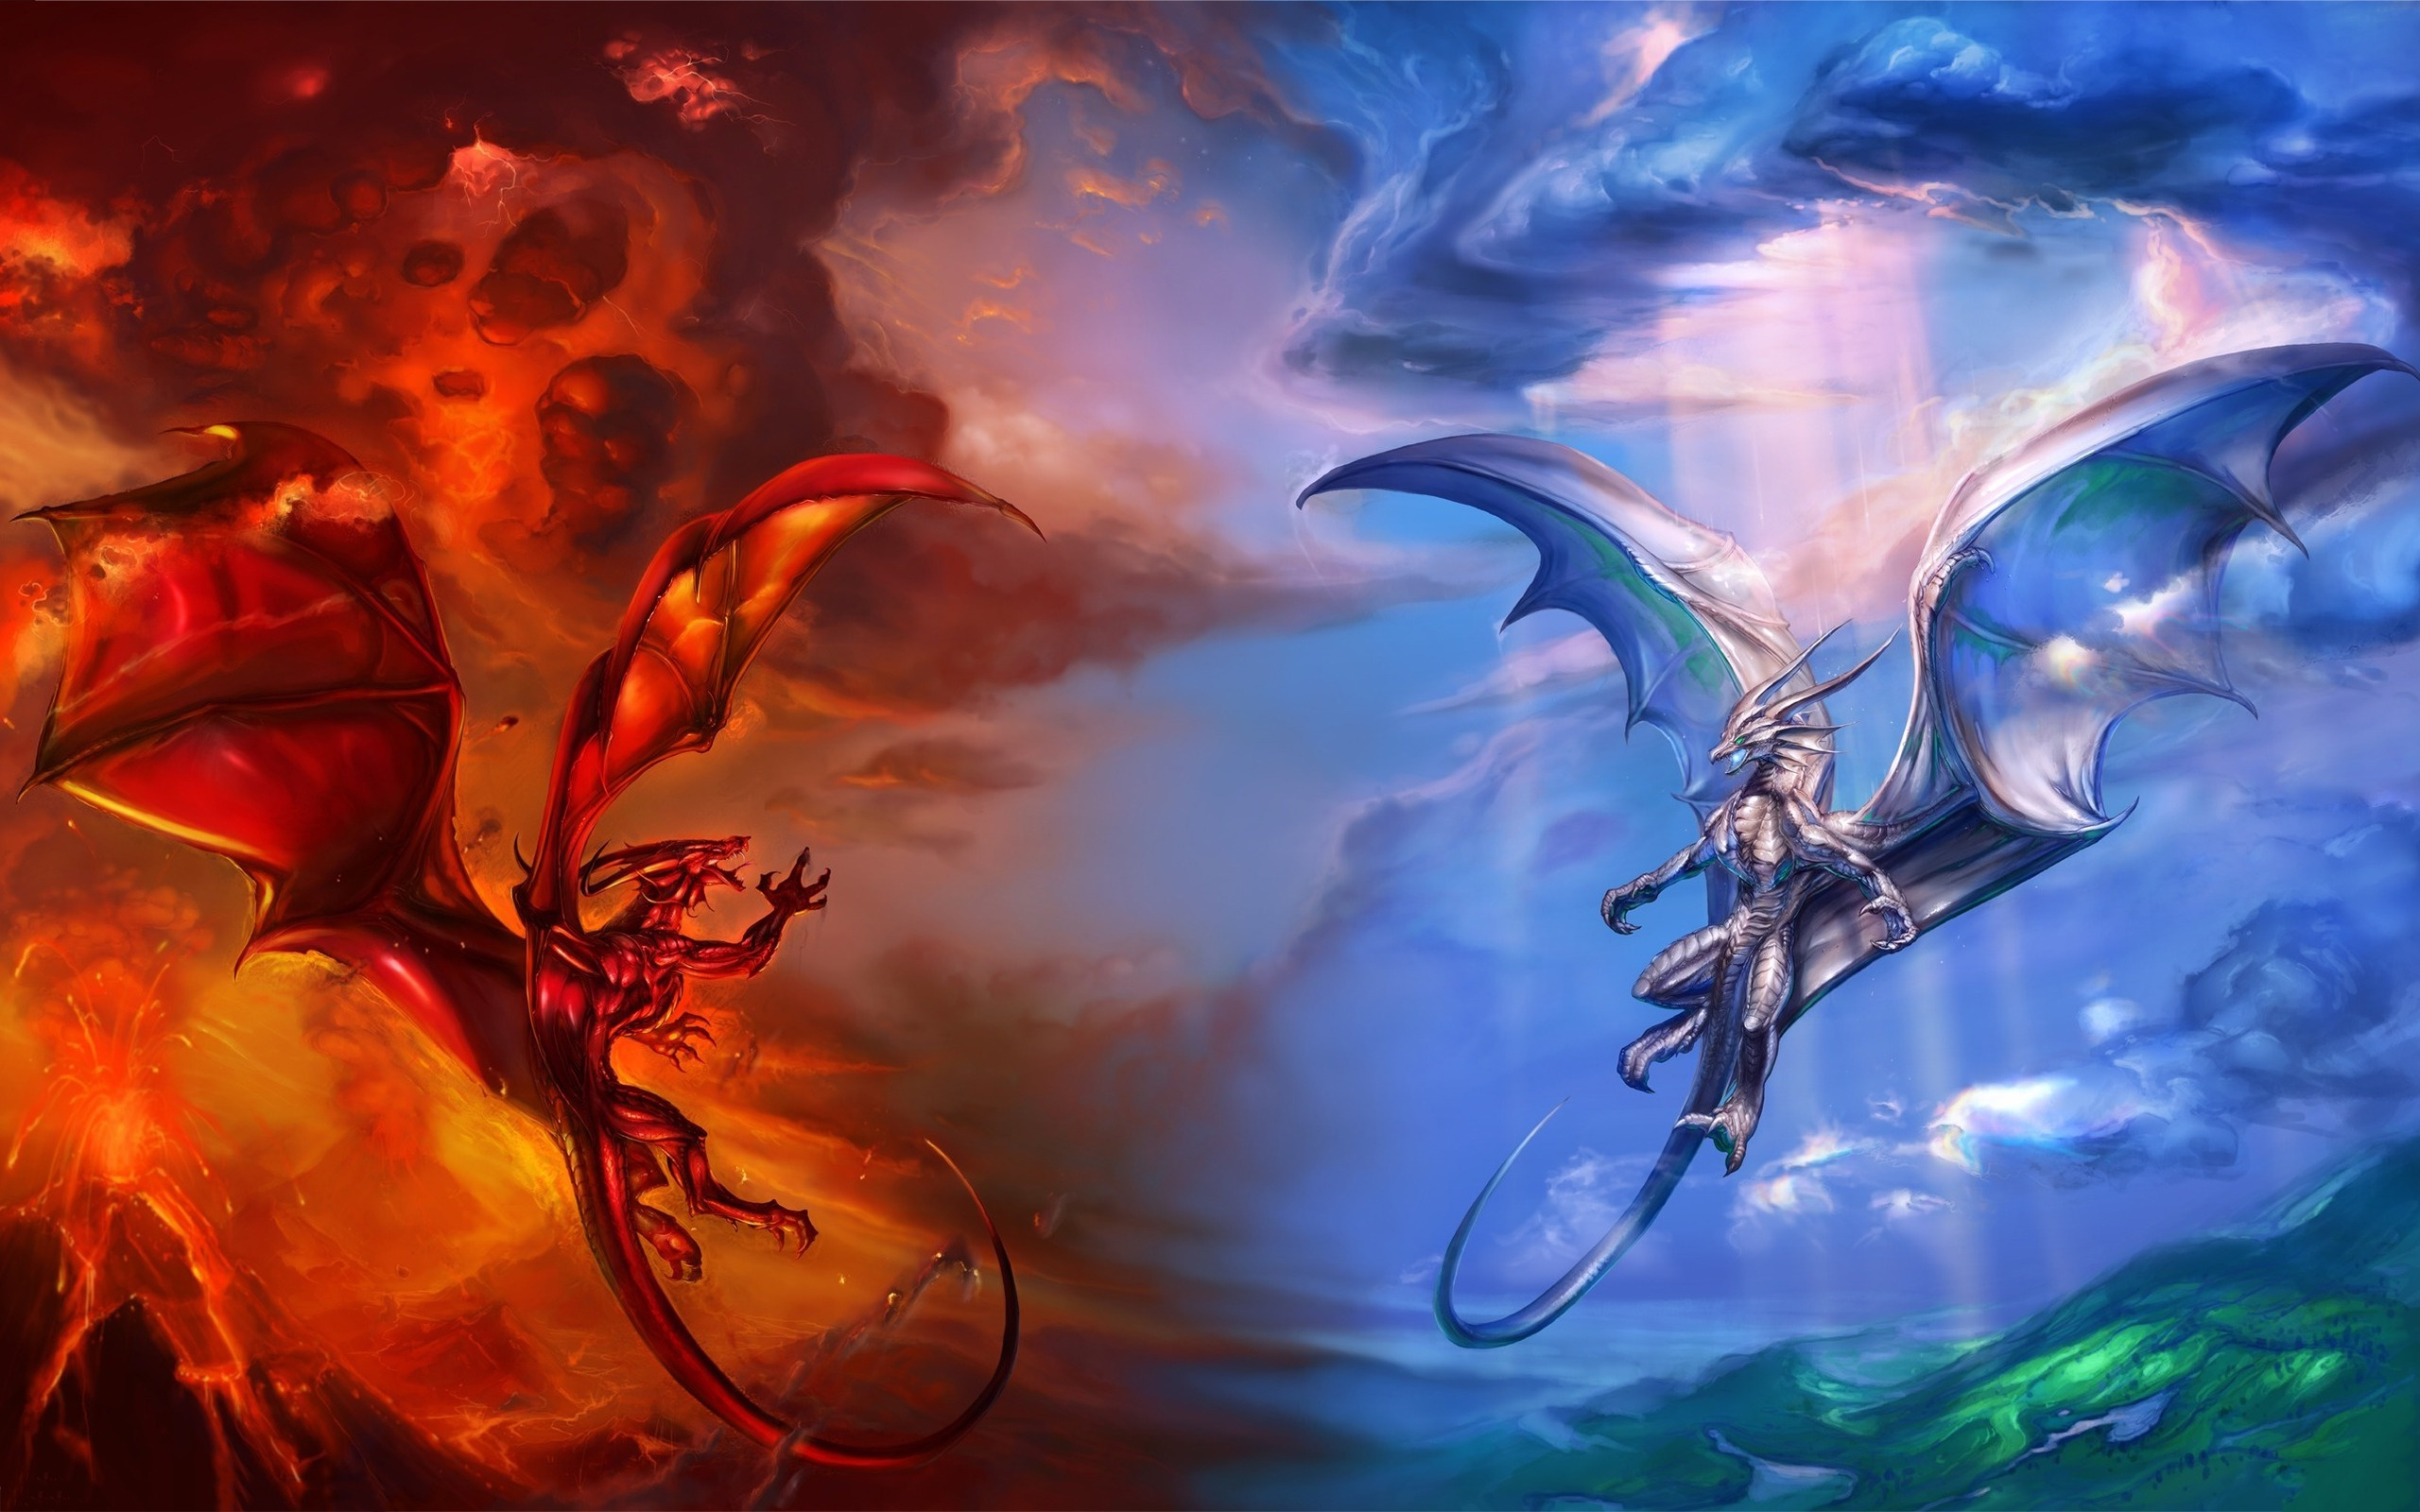 Heaven and hell dragons